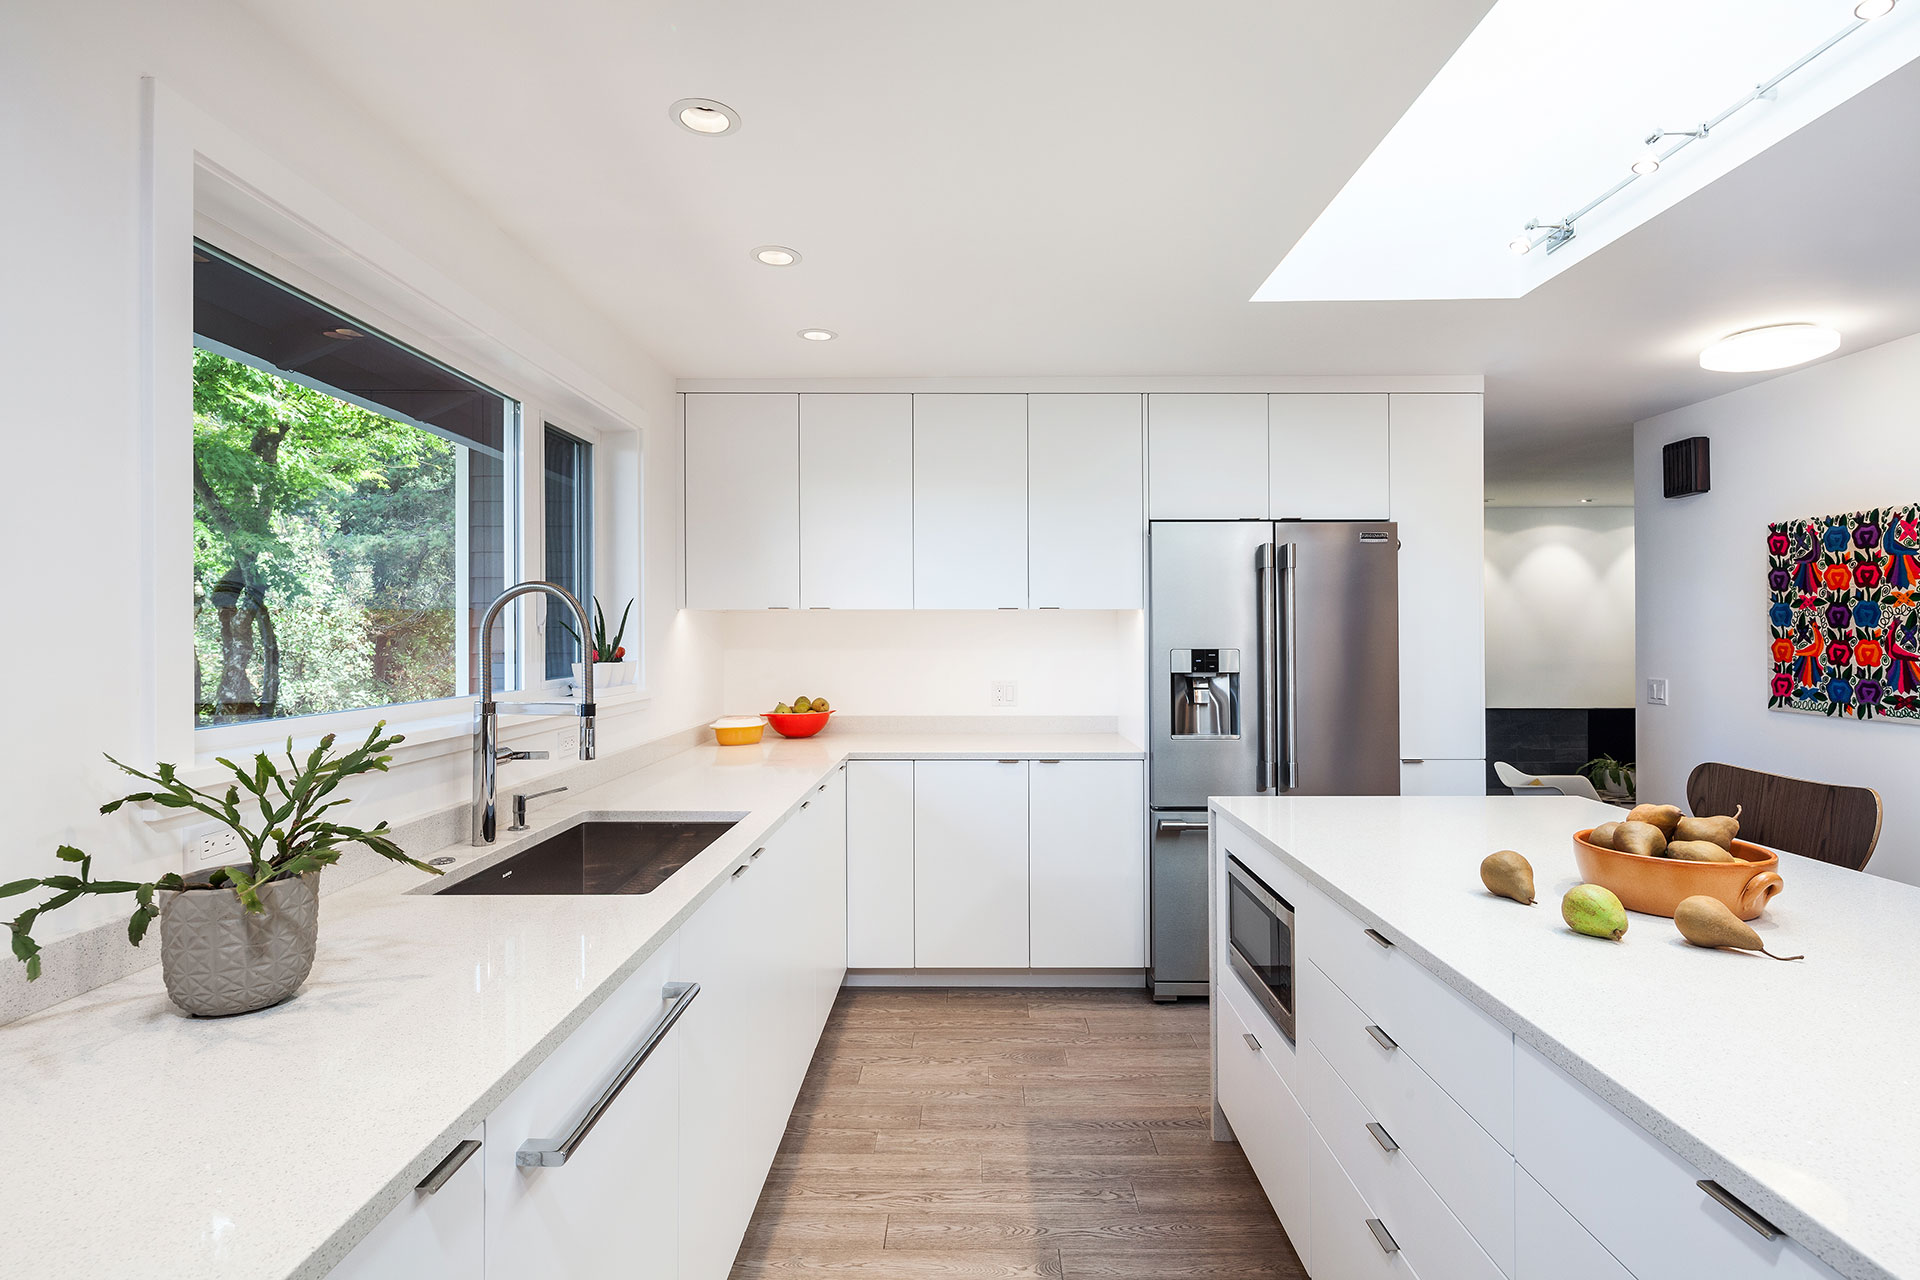 The cabinets on one side of the kitchen at the Hawkridge Modern are made from white rigid thermo-foil. The countertops are white quartz.